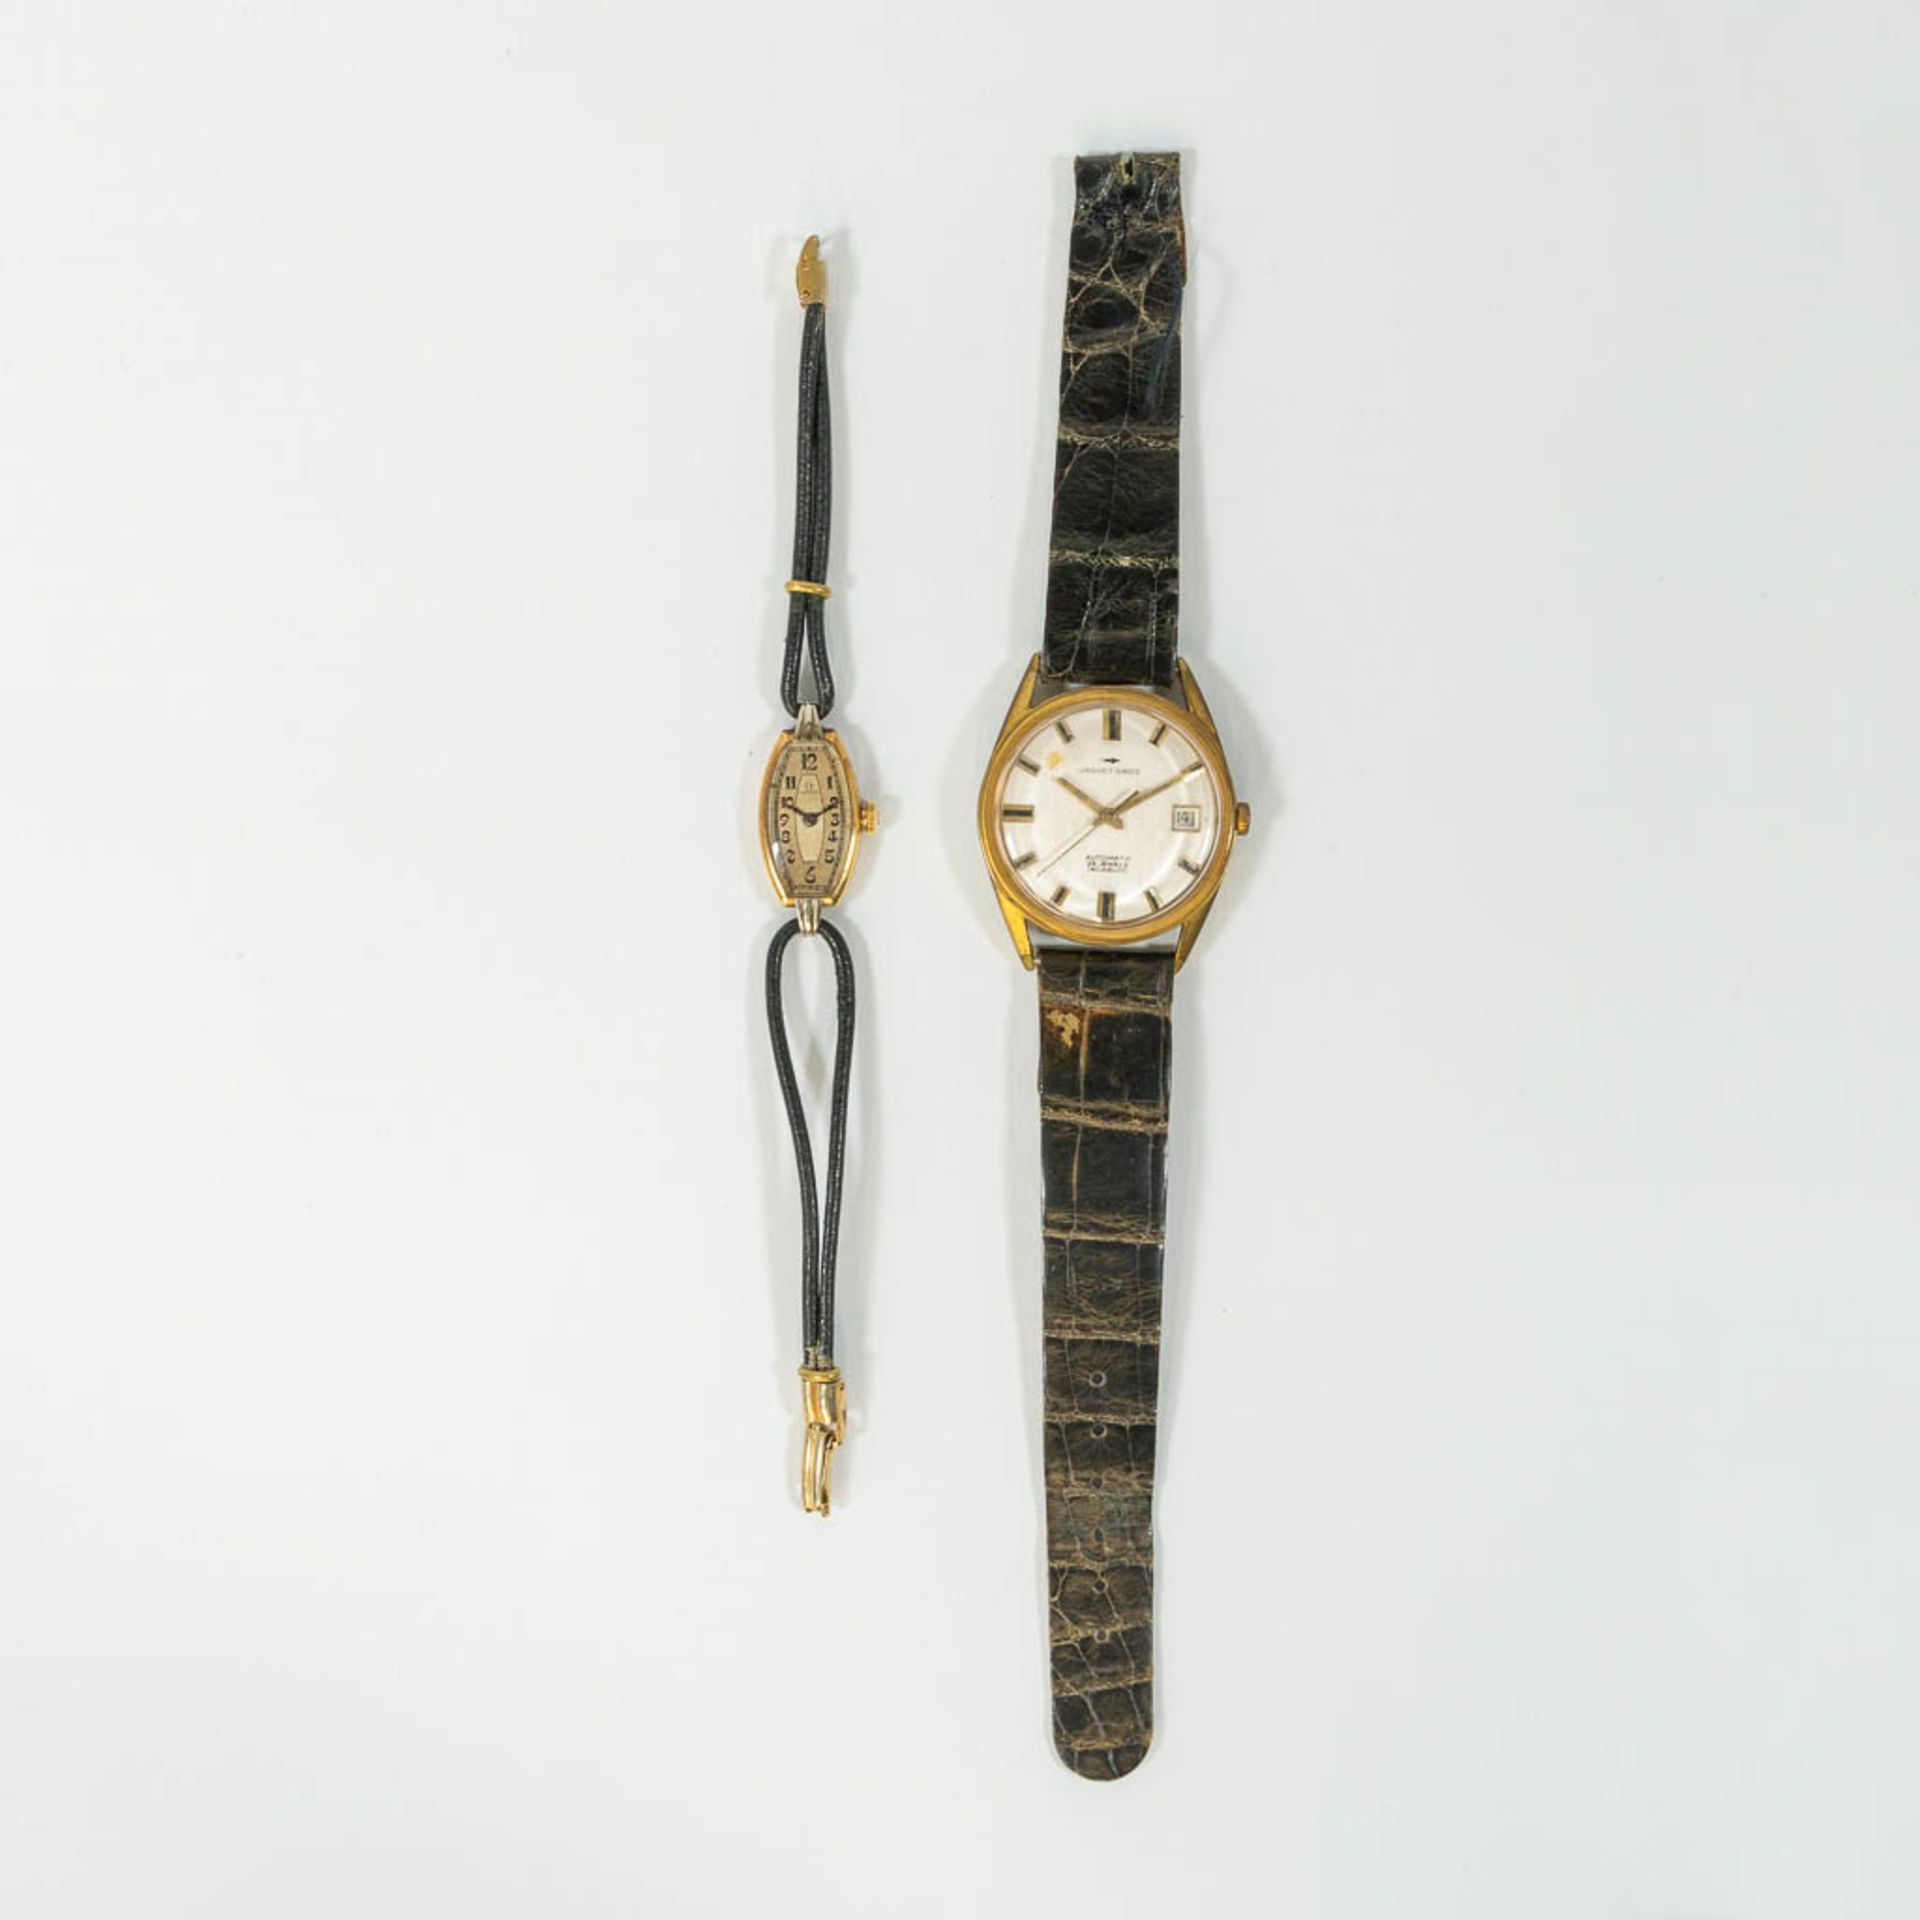 A collection of 2 wristwatches: Omega antique woman's 18kt gold and Jaqcuet Droz vintage watch.